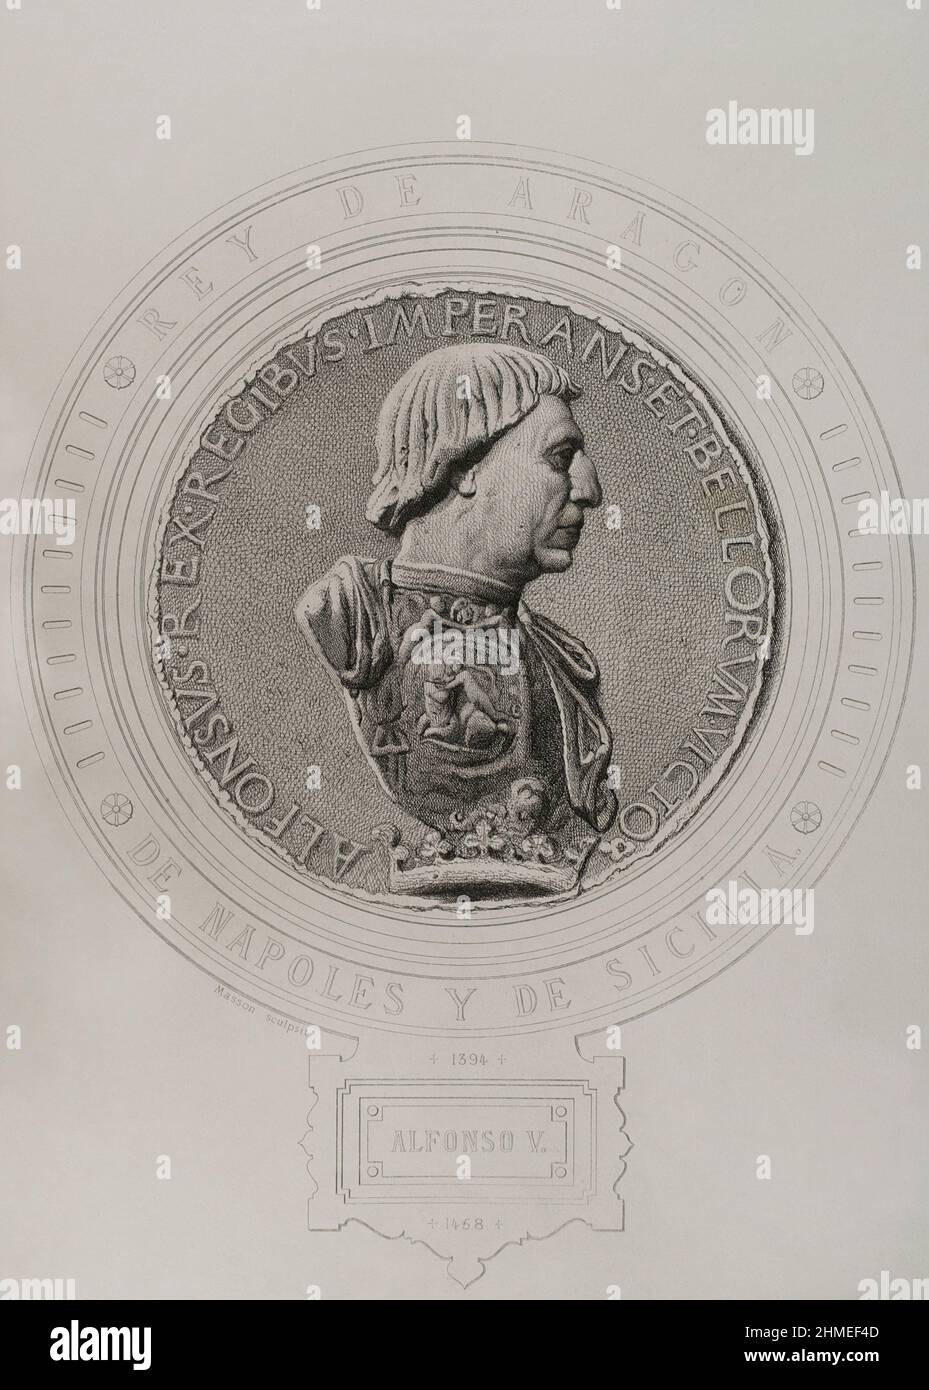 Alfonso V the Magnanimous (1396-1458). Alfonso IV as Count of Barcelona, Alfonso III as King of Valencia and Alfonso I as King of Mallorca and Naples. King of the Crown of Aragon (1416-1458). King of Naples (1442-1458). Portrait. Engraving by Masson. Lithographed by Magín Pujadas. 'Historia General de España' by Modesto Lafuente. Volume II. Published in Barcelona, 1879. Stock Photo